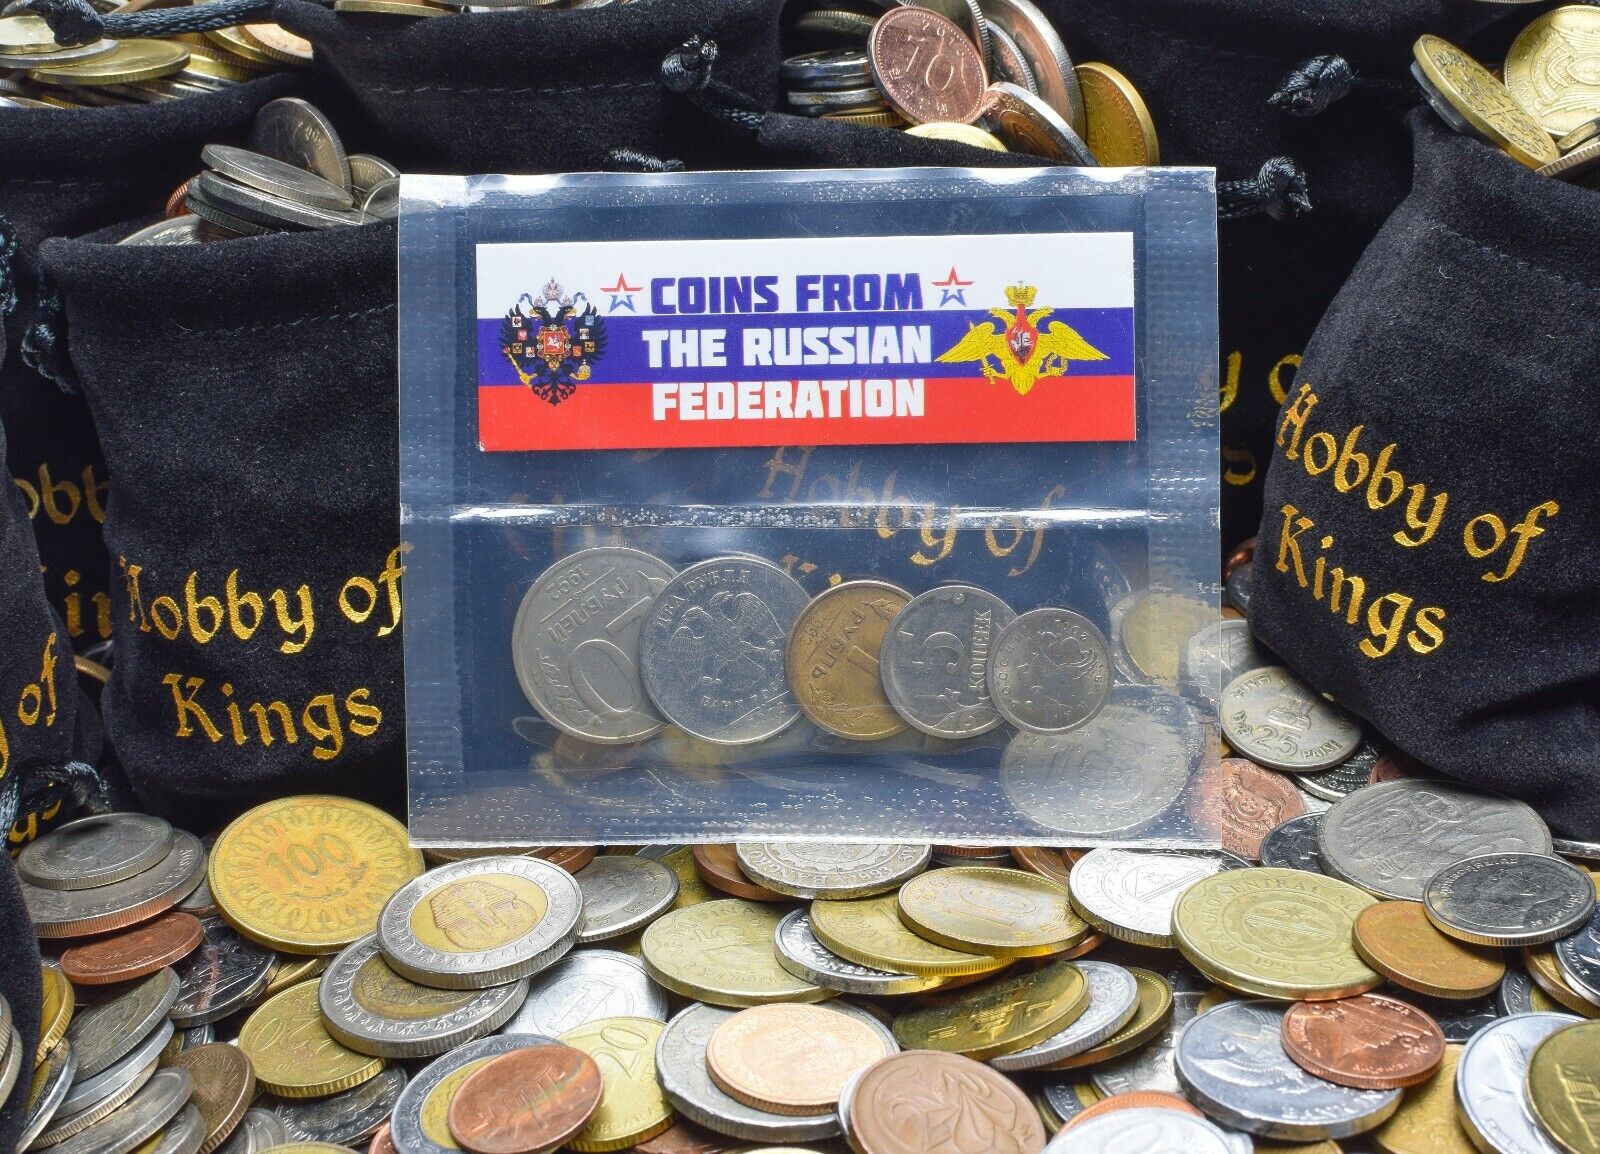 5 RUSSIAN FEDERATION COINS DIFFERENT EUROPEAN COINS FOREIGN CURRENCY, MONEY Без бренда - фотография #3